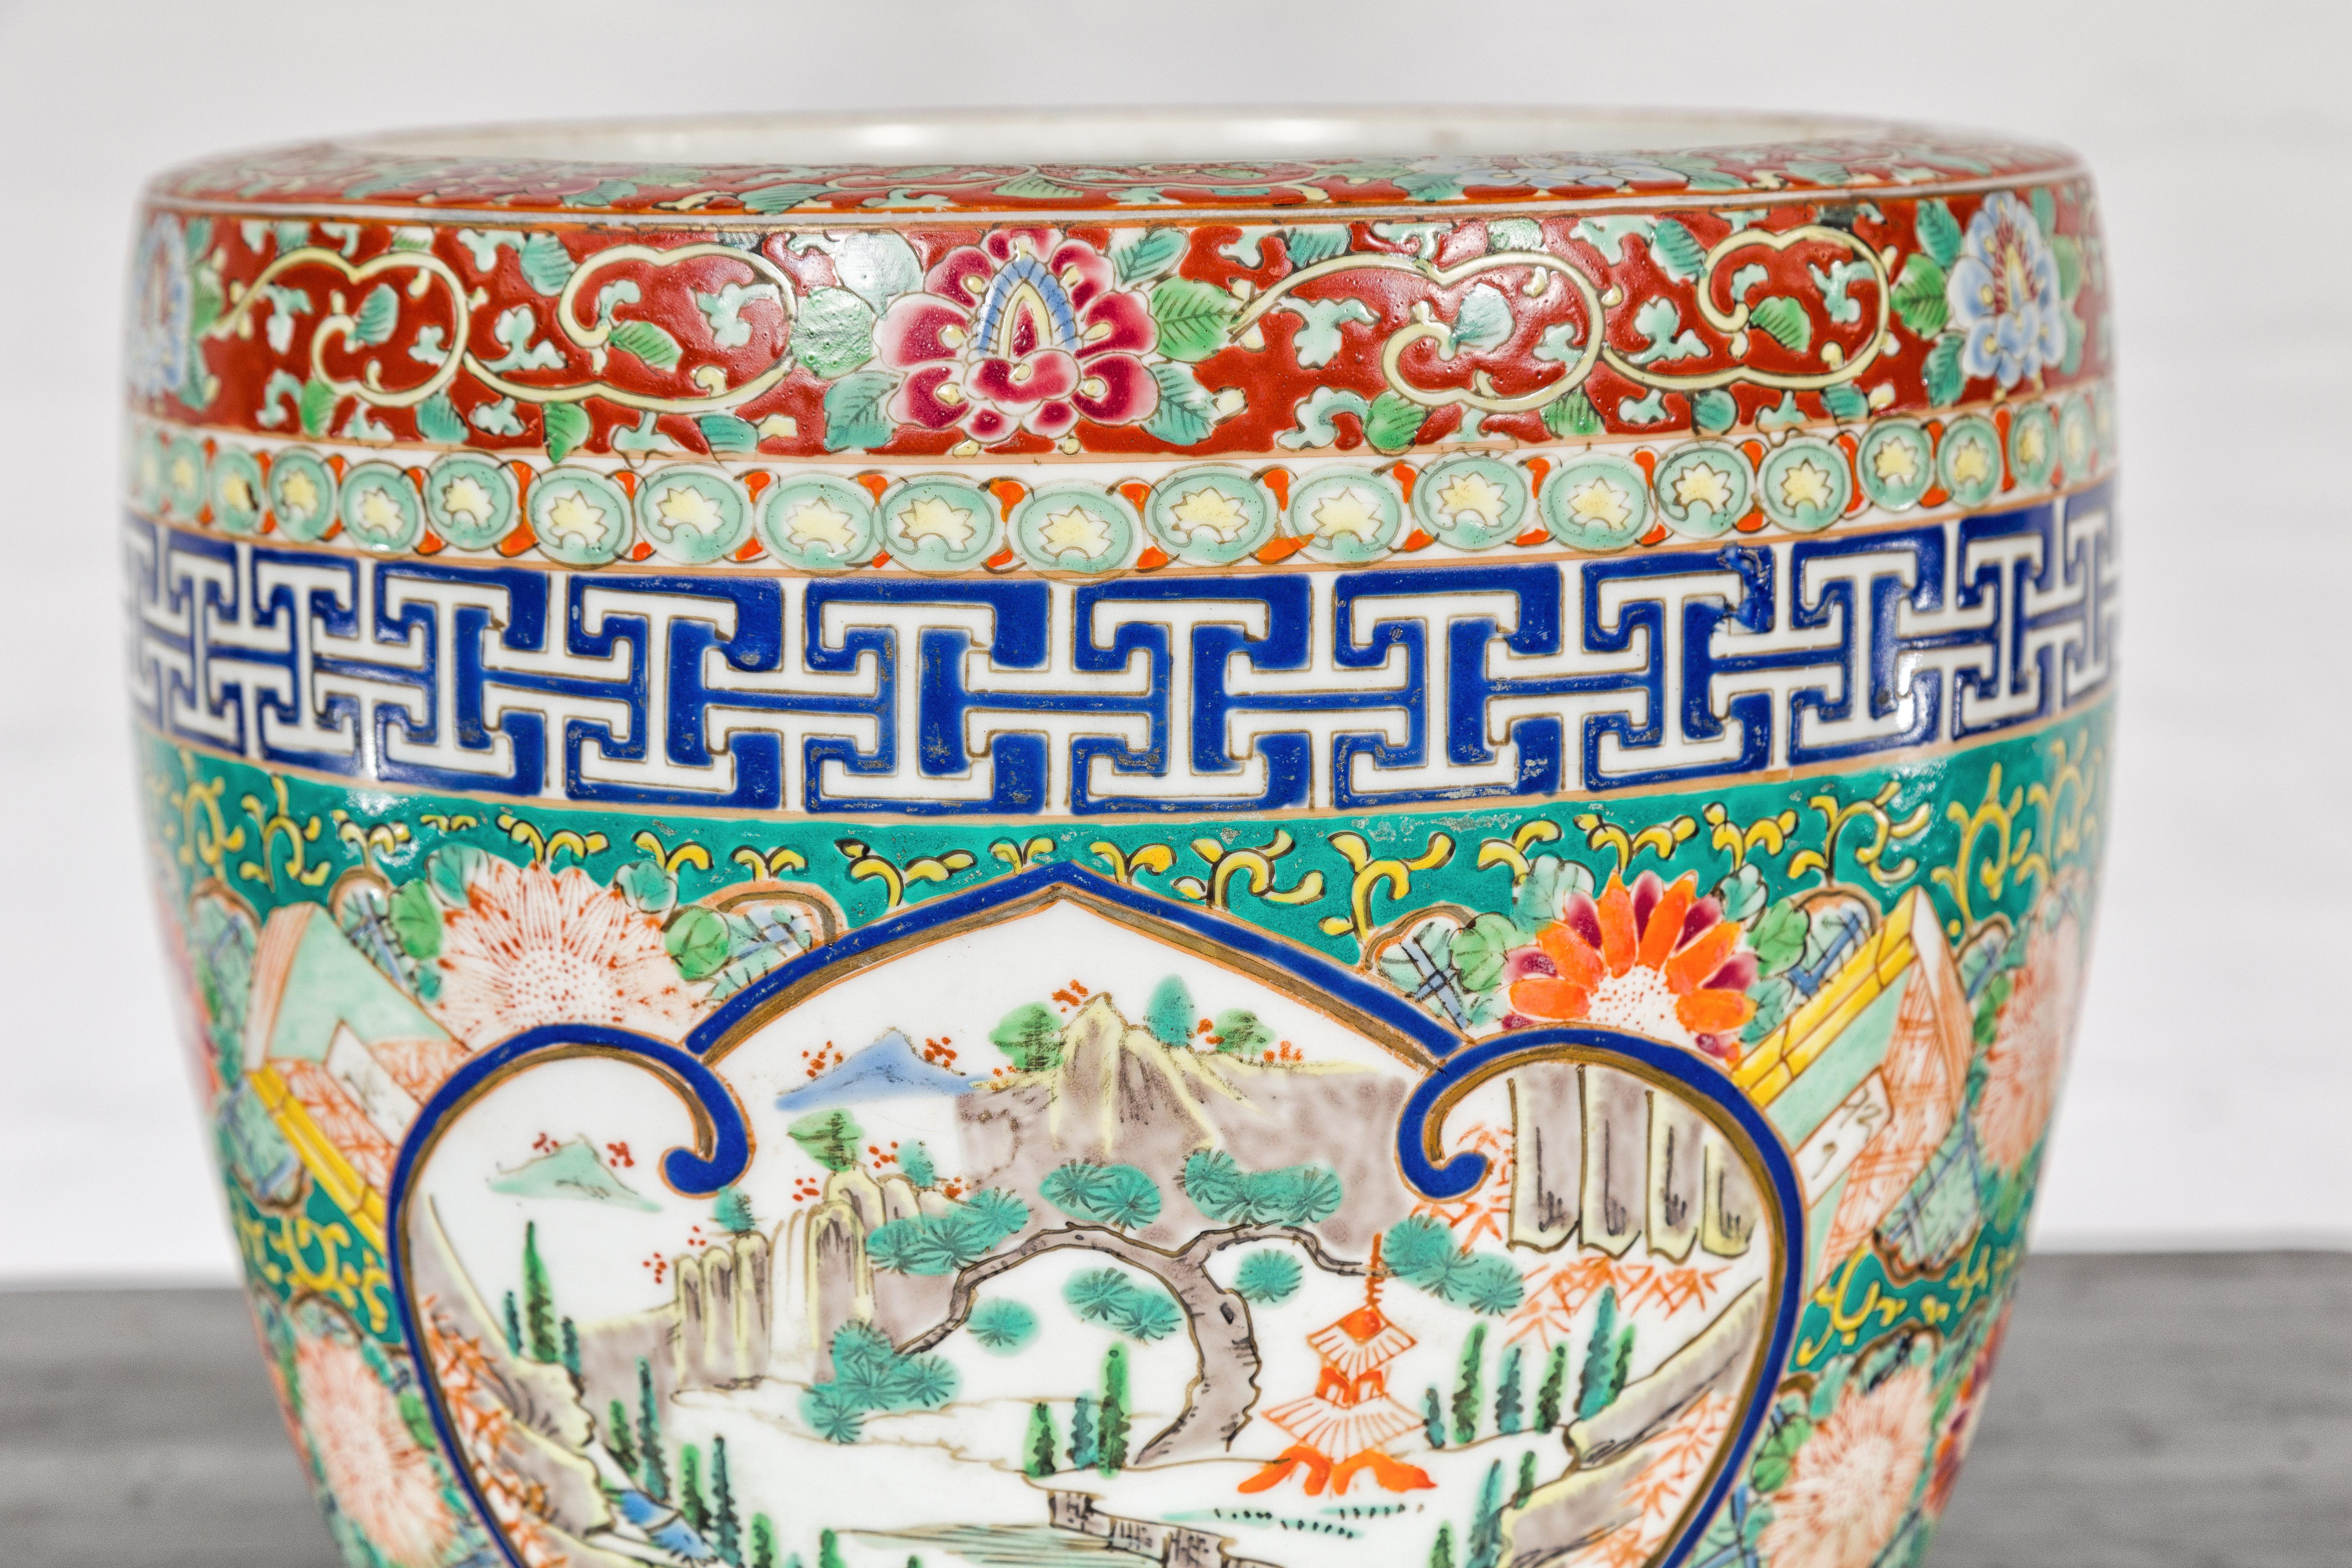 Porcelain Japanese Hand-Painted Imari Planter with Landscape, Tree, Flowers and Books For Sale